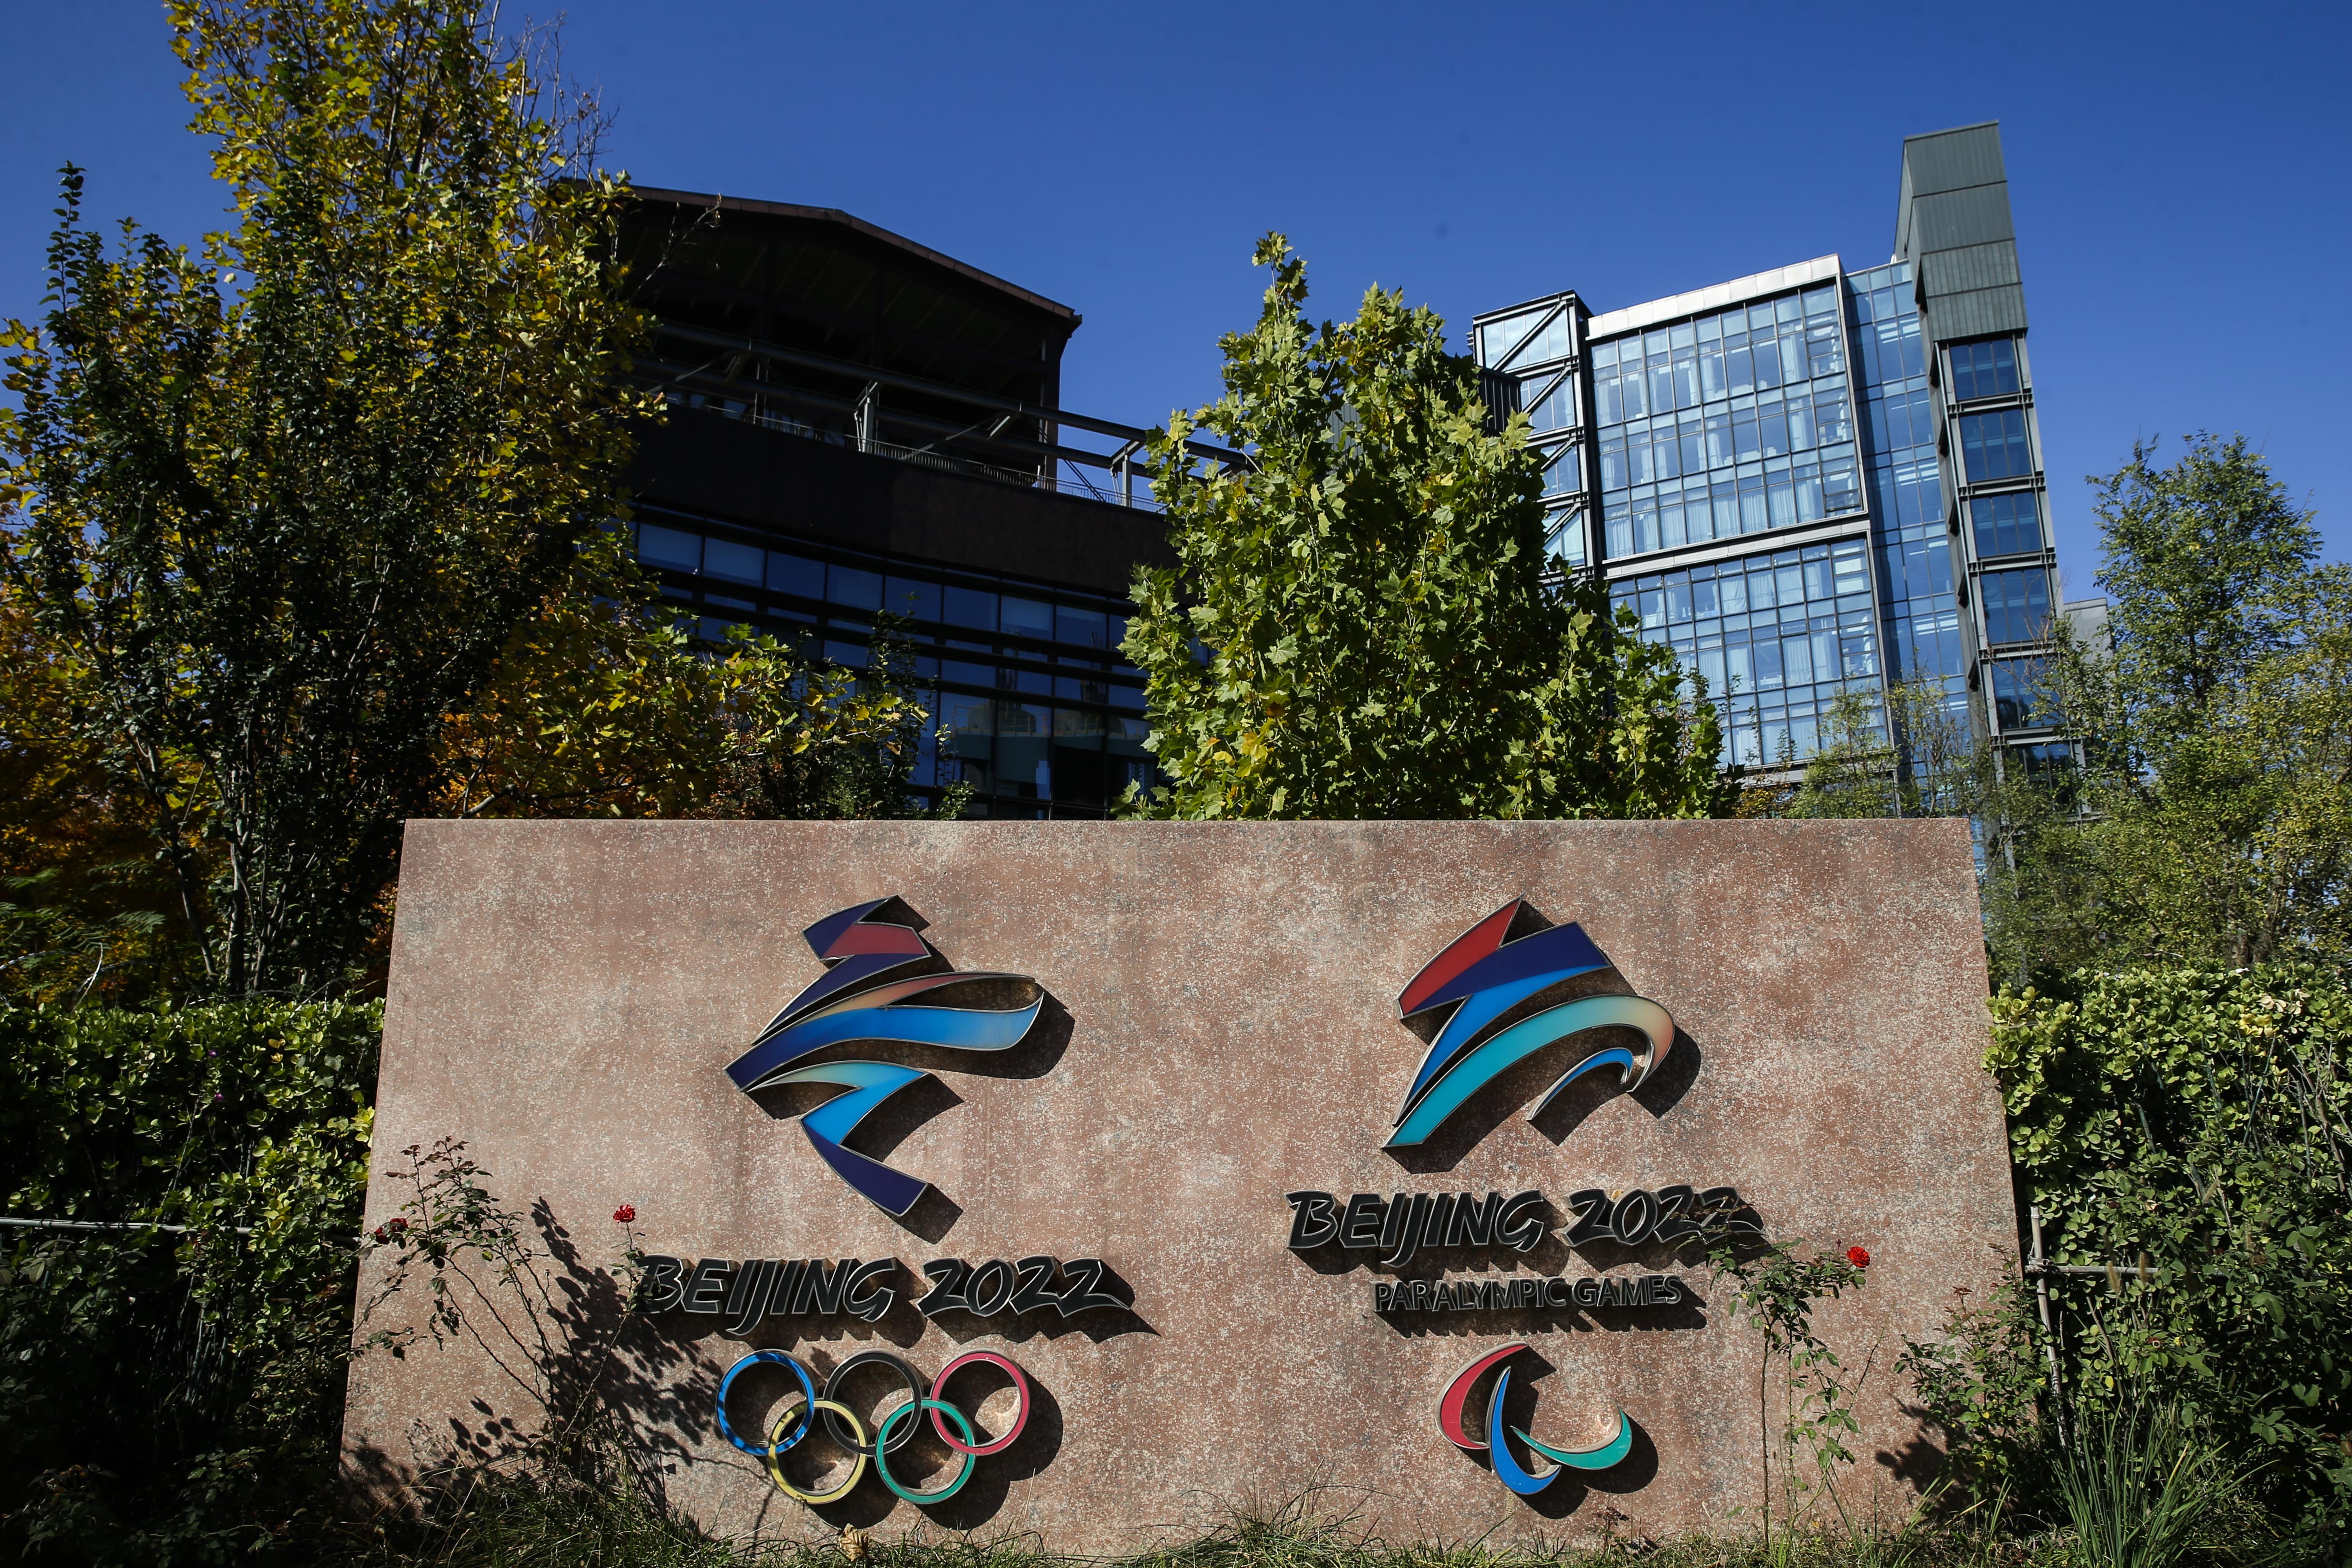 A view outside the building of the Beijing Organising Committee for the 2022 Olympic and Paralympic Winter Games on October 26, 2021 in Beijing, China.